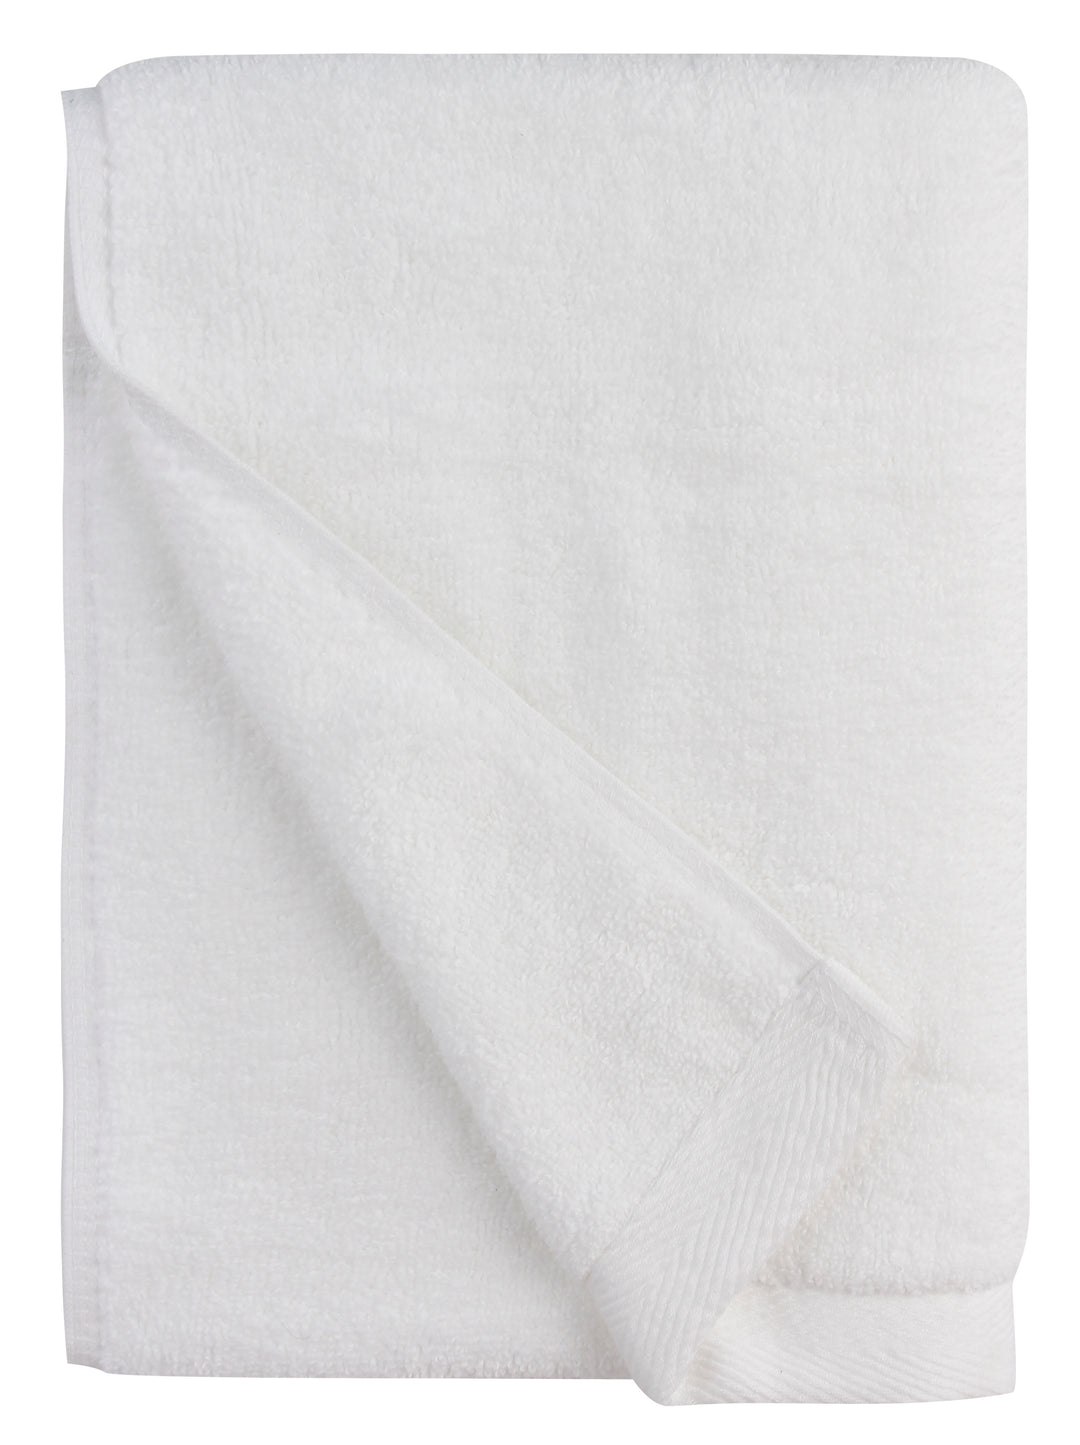 Flat Loop Hand Towels - 4 Pack, Porcelain (White) – The Everplush